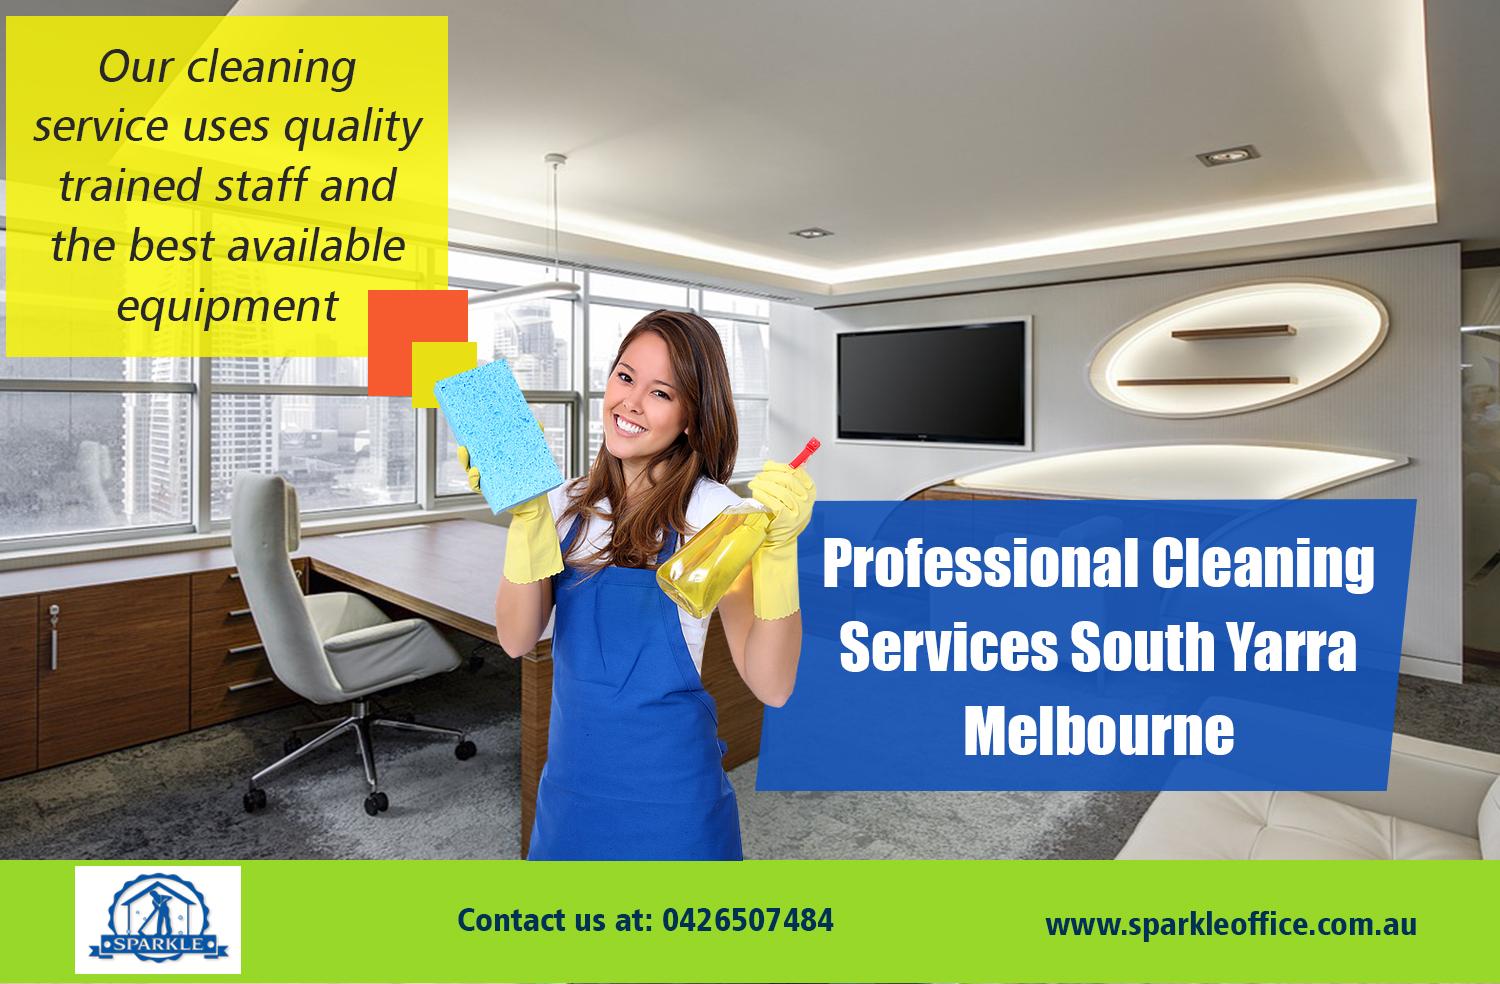 Professional Cleaning Services South Yarra Melbourne